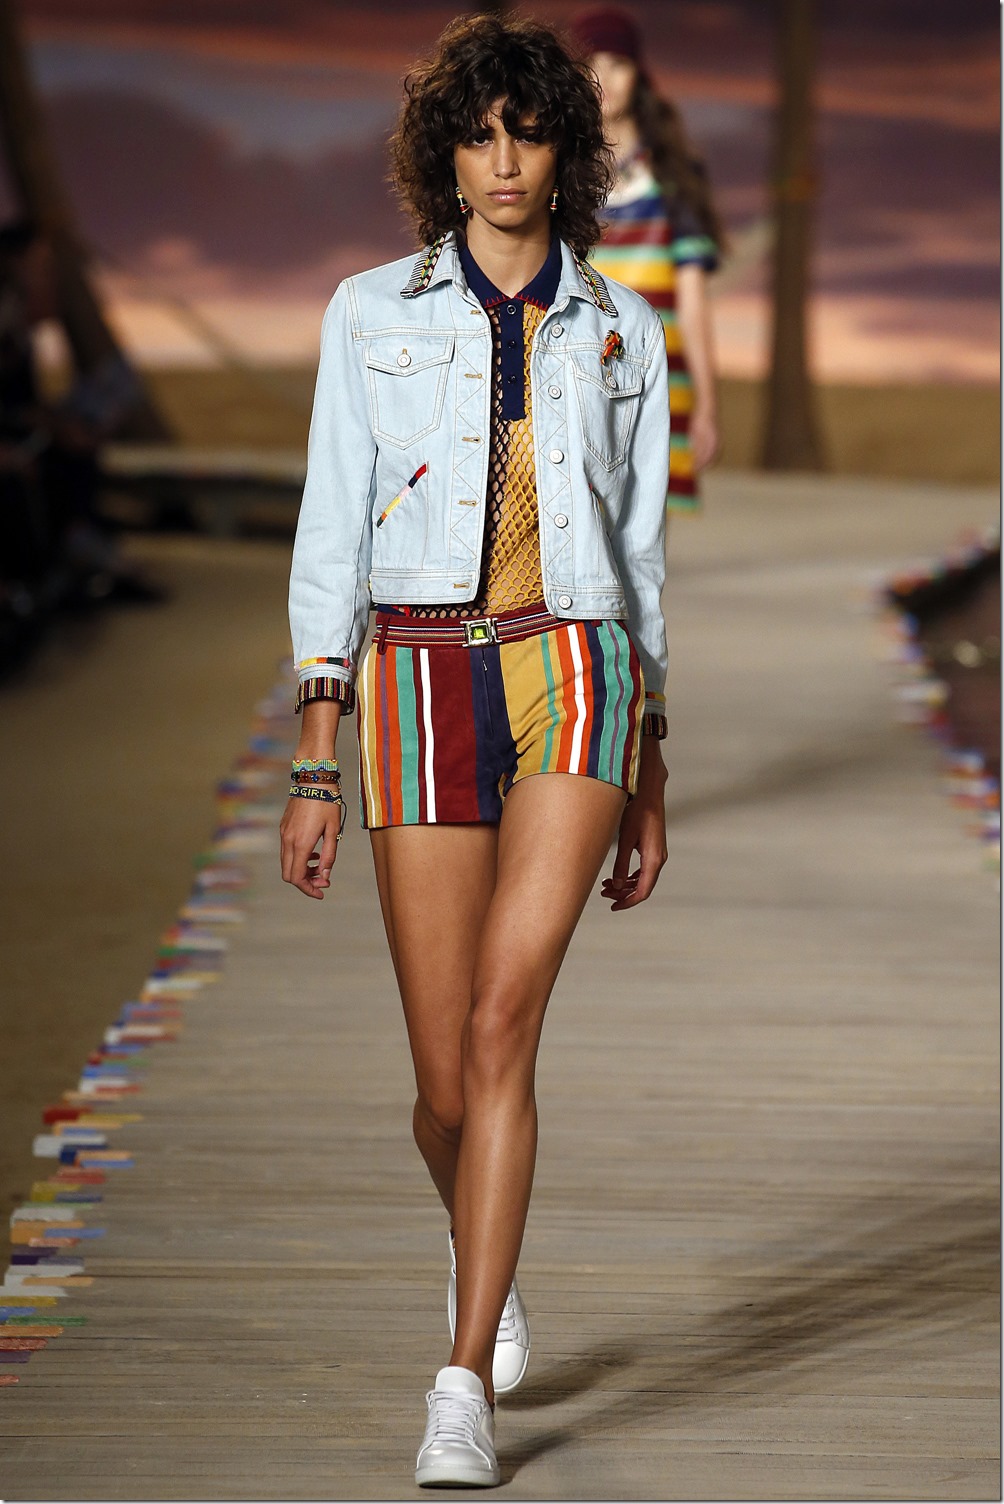 Tommy Hilfiger SPRING 2016 READY-TO-WEAR